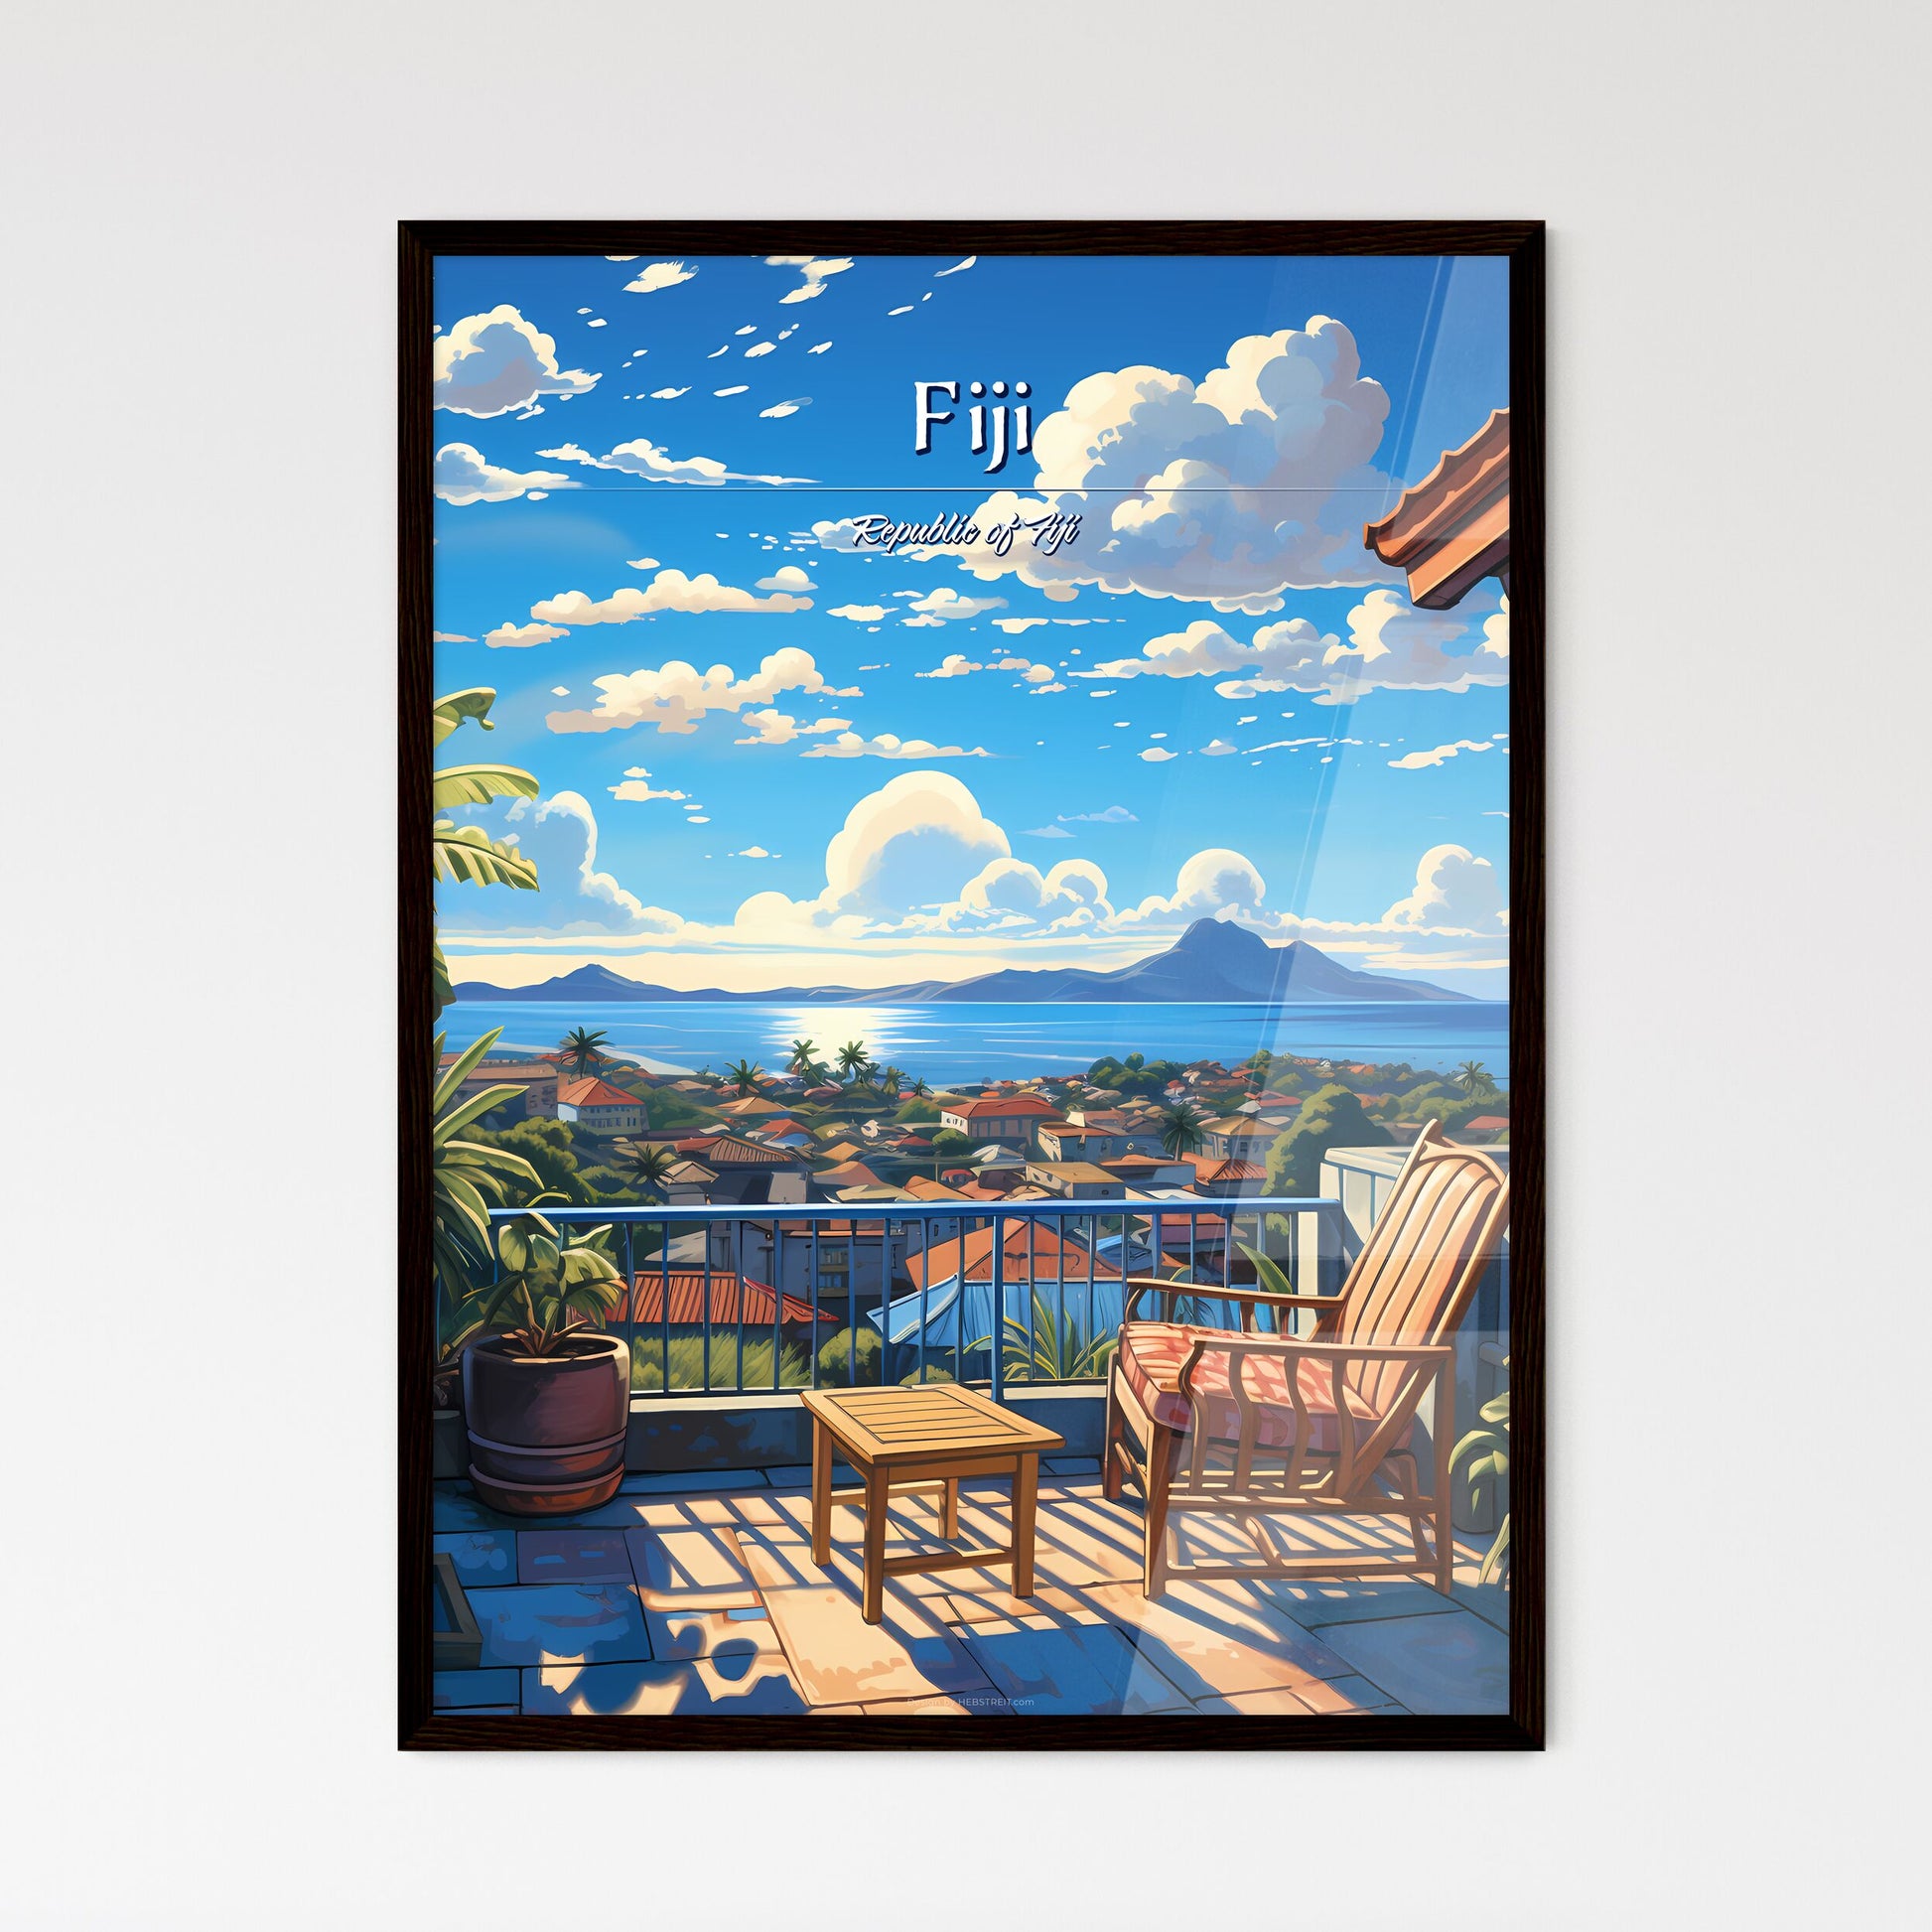 On the roofs of Fiji, Republic of Fiji - Art print of a balcony with a view of a city and mountains Default Title